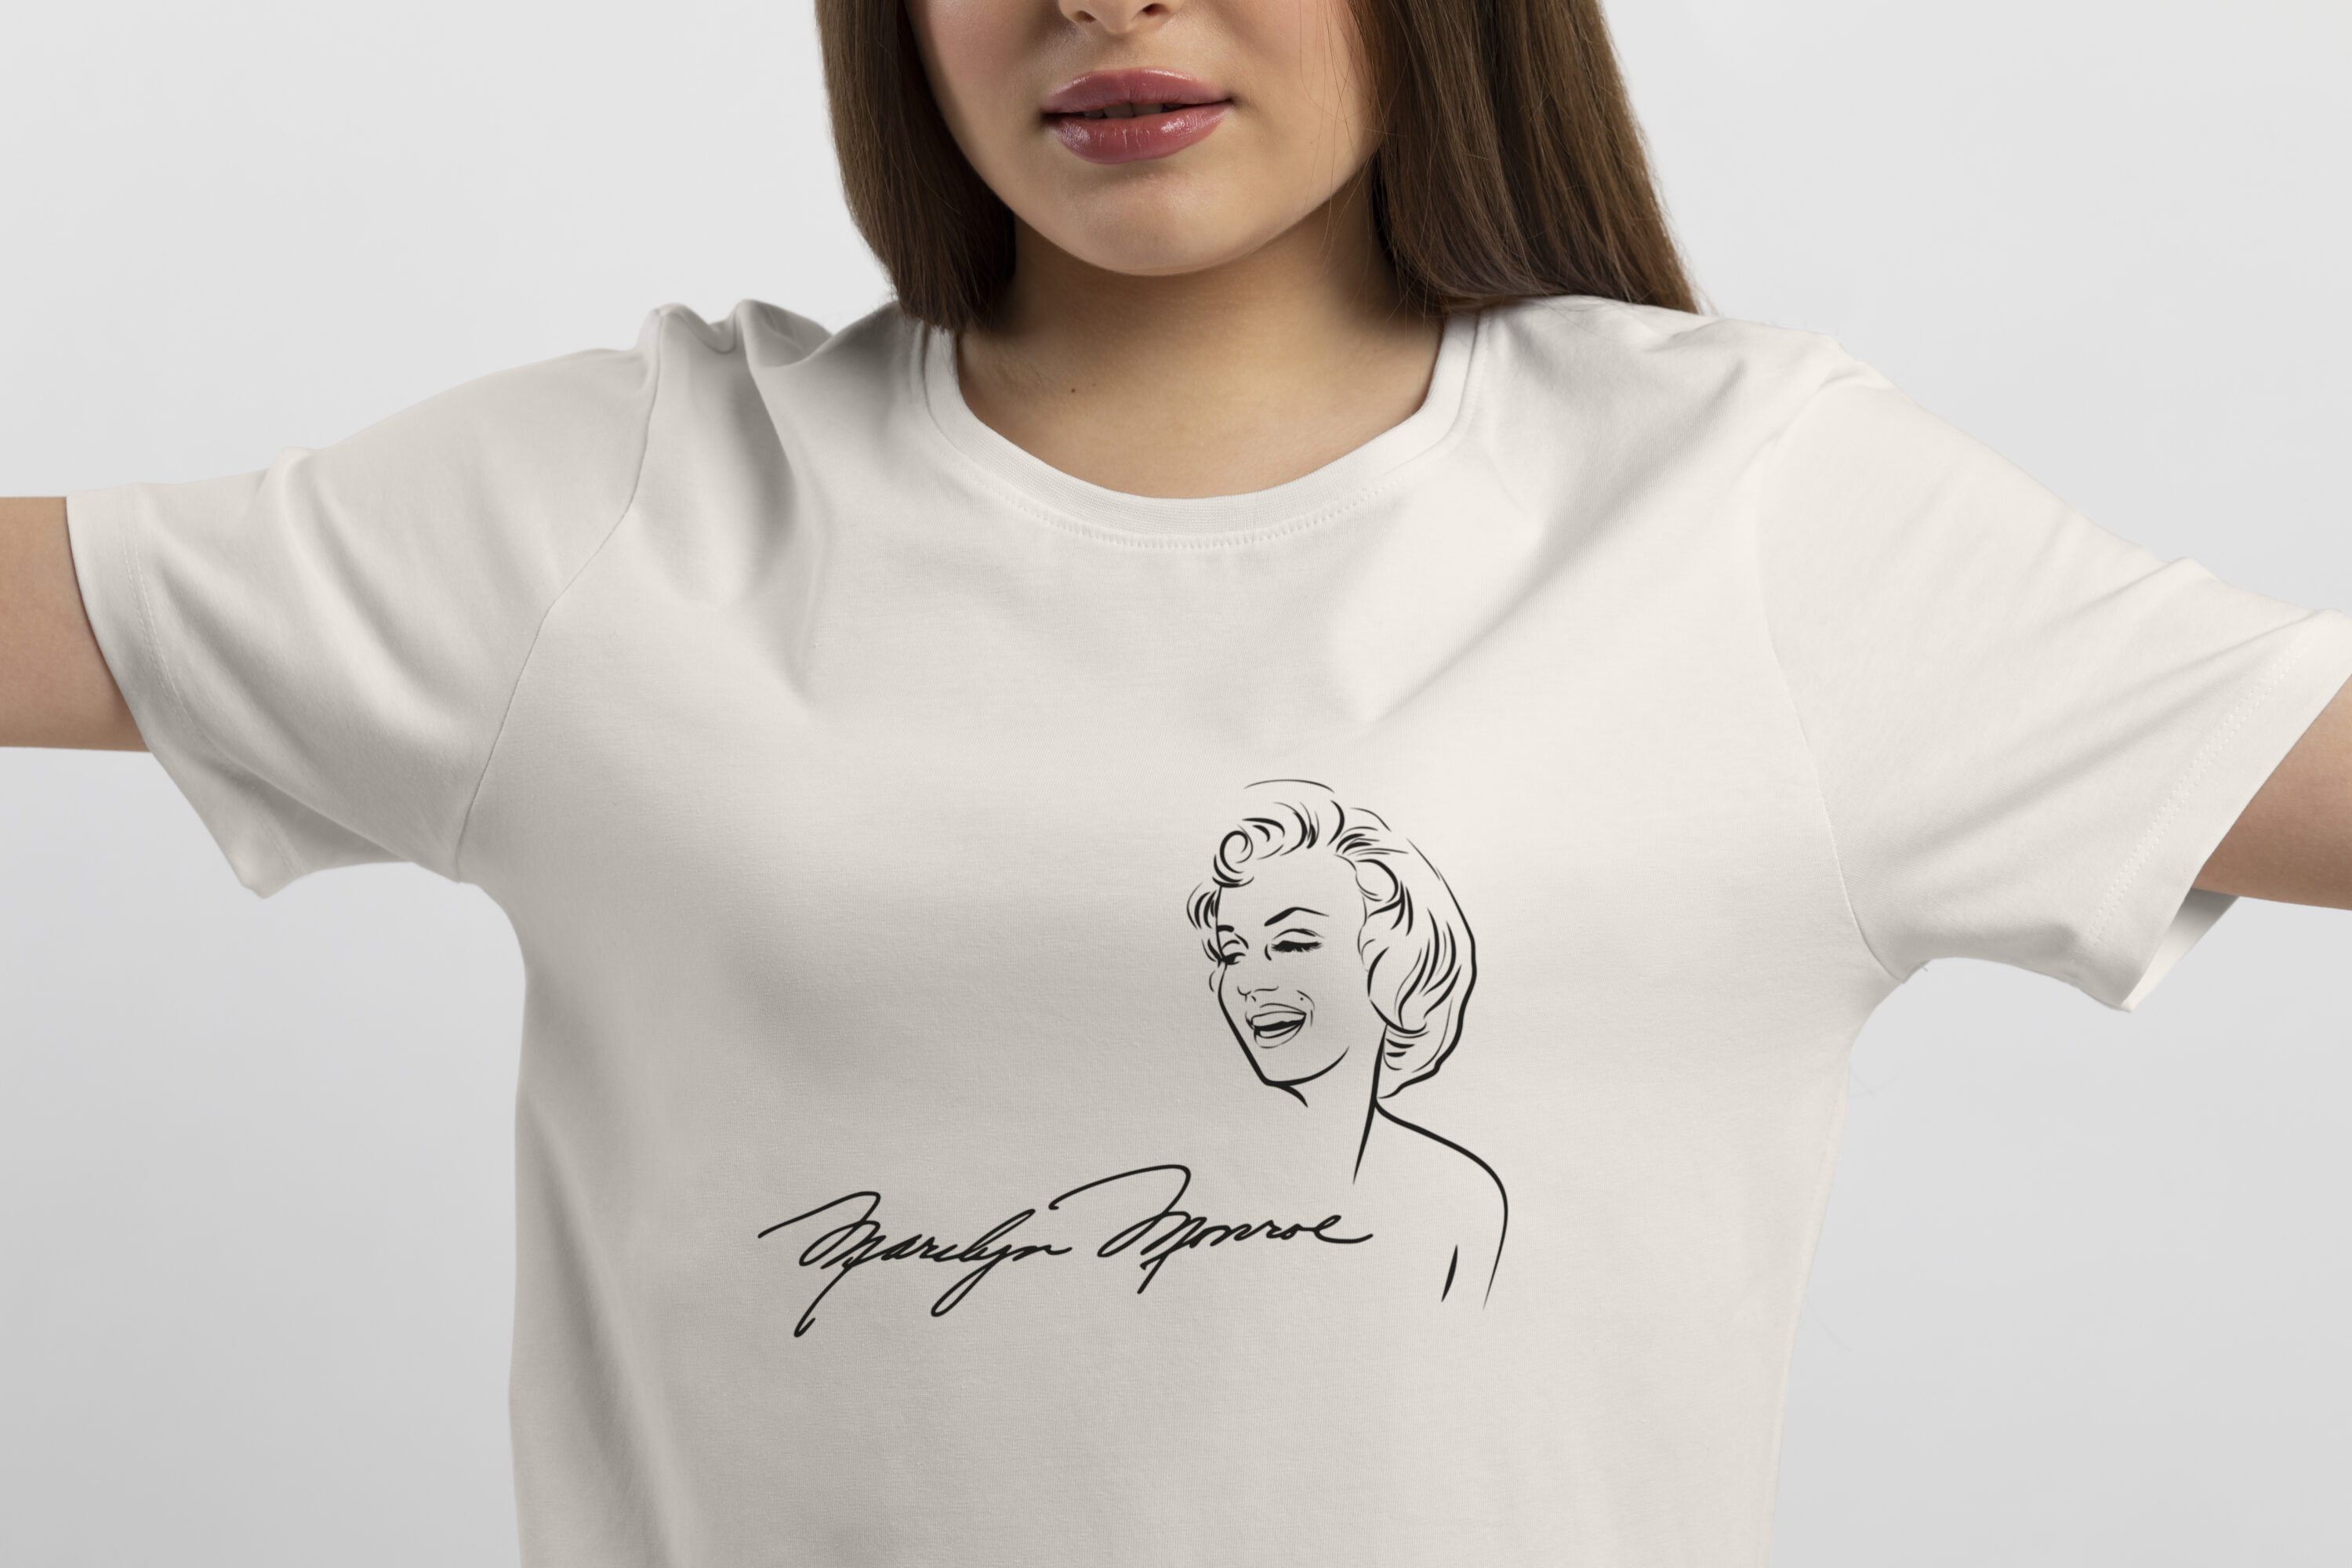 Image of a white t-shirt with a gorgeous print of Marilyn Monroe and her signature.